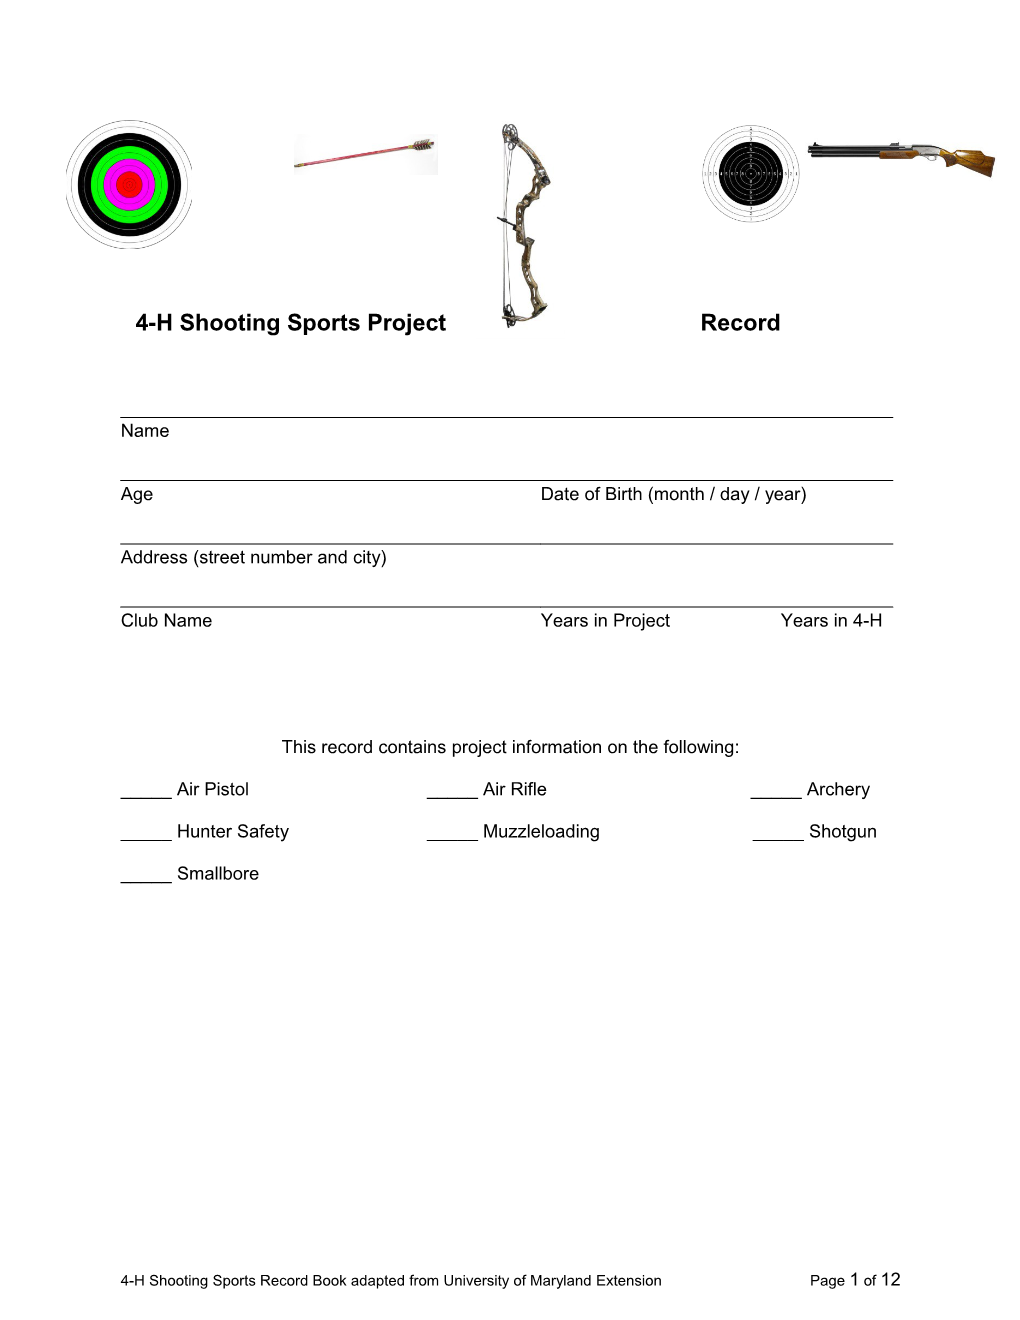 4-H Shooting Sports Project Record